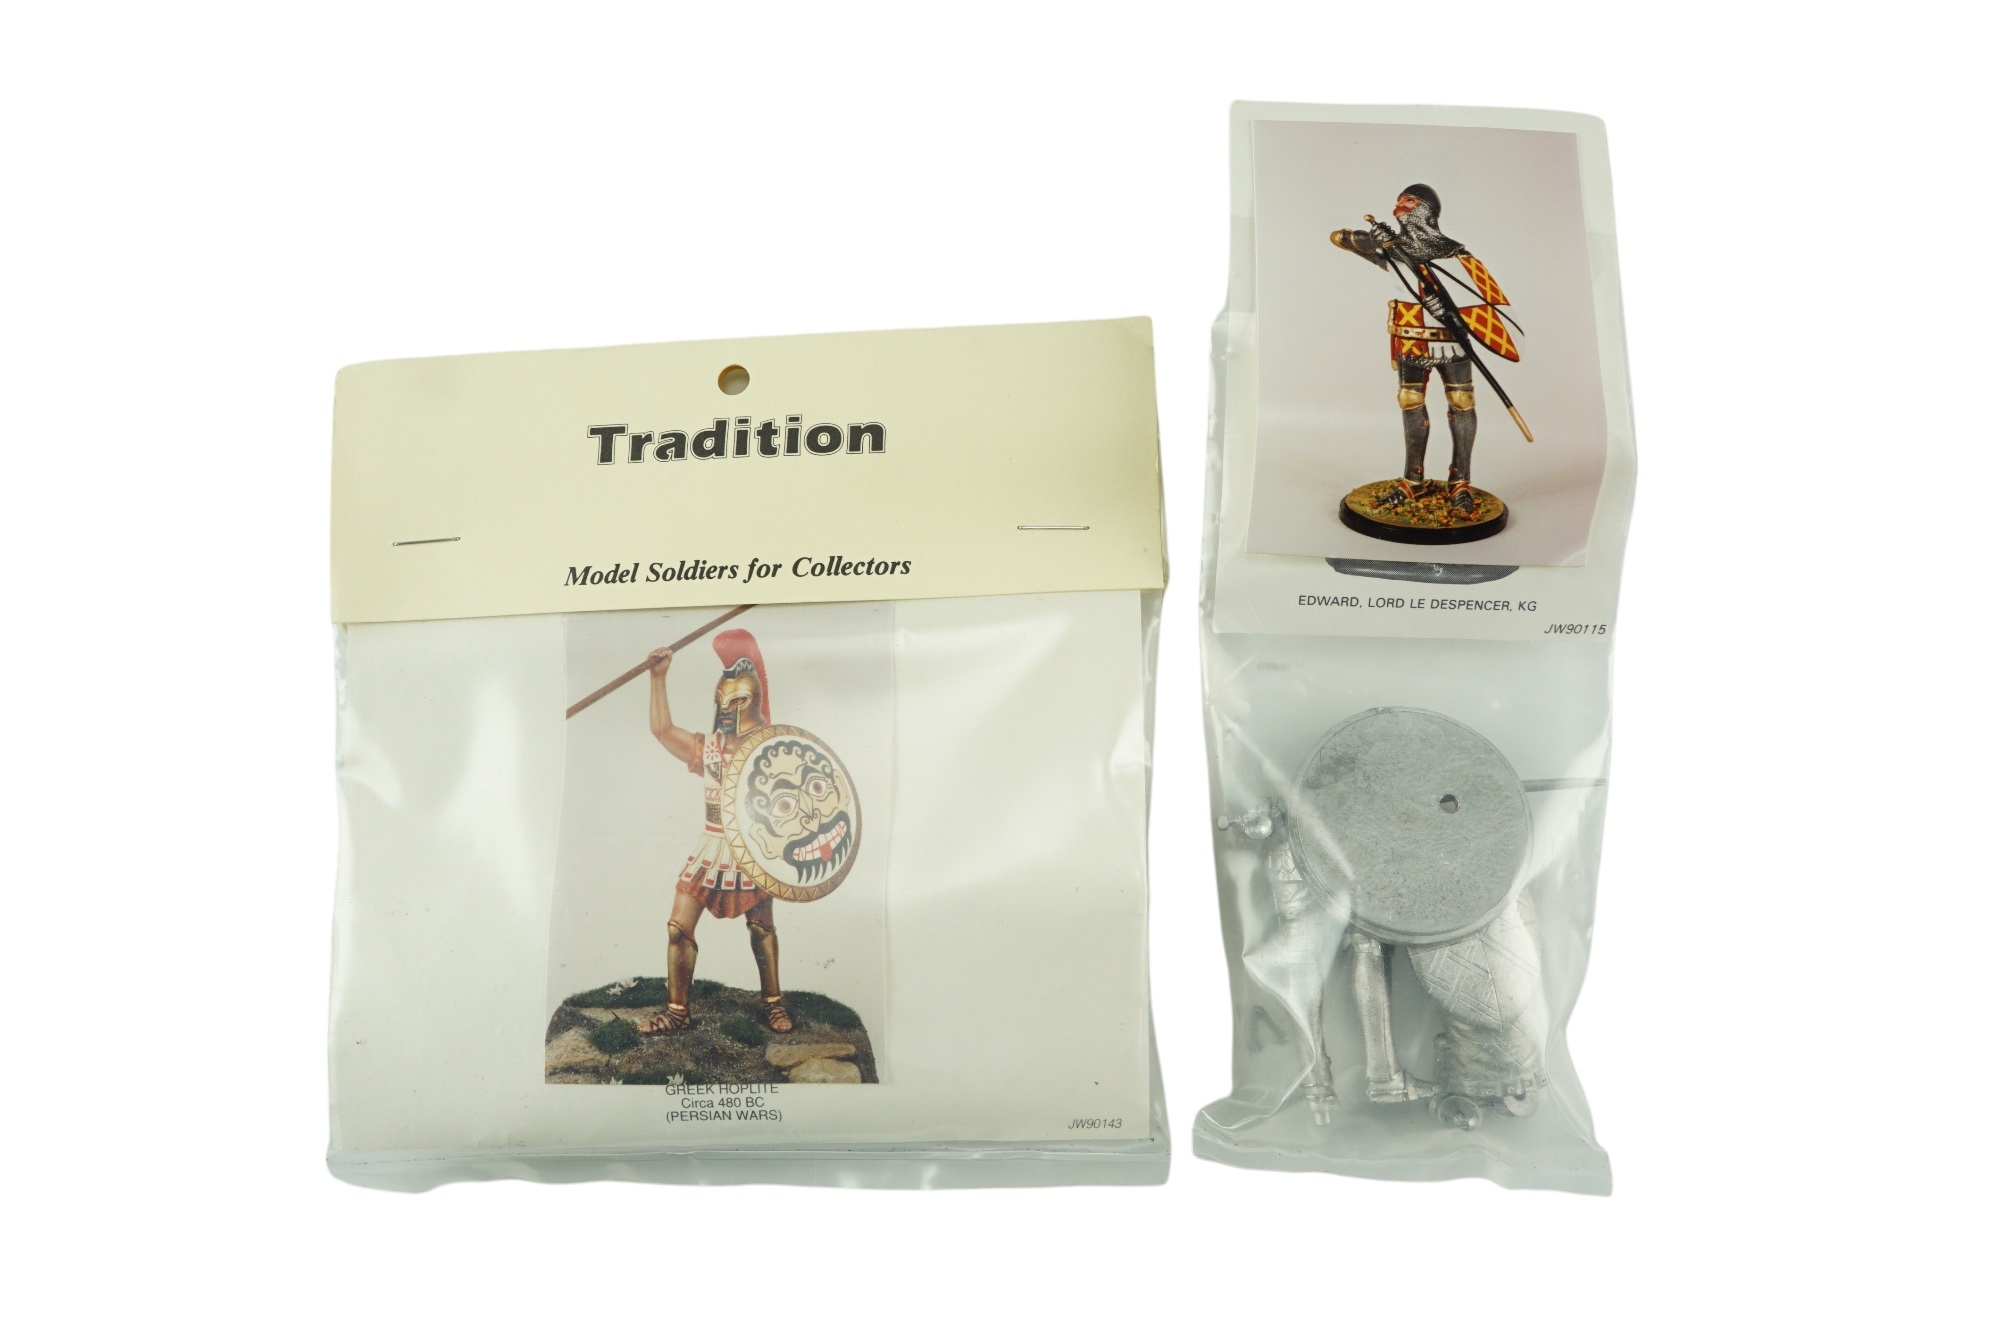 Eight Tradition "Model Soldiers for Collectors" diecast lead model kits, by Tradition of Curzon - Image 6 of 7